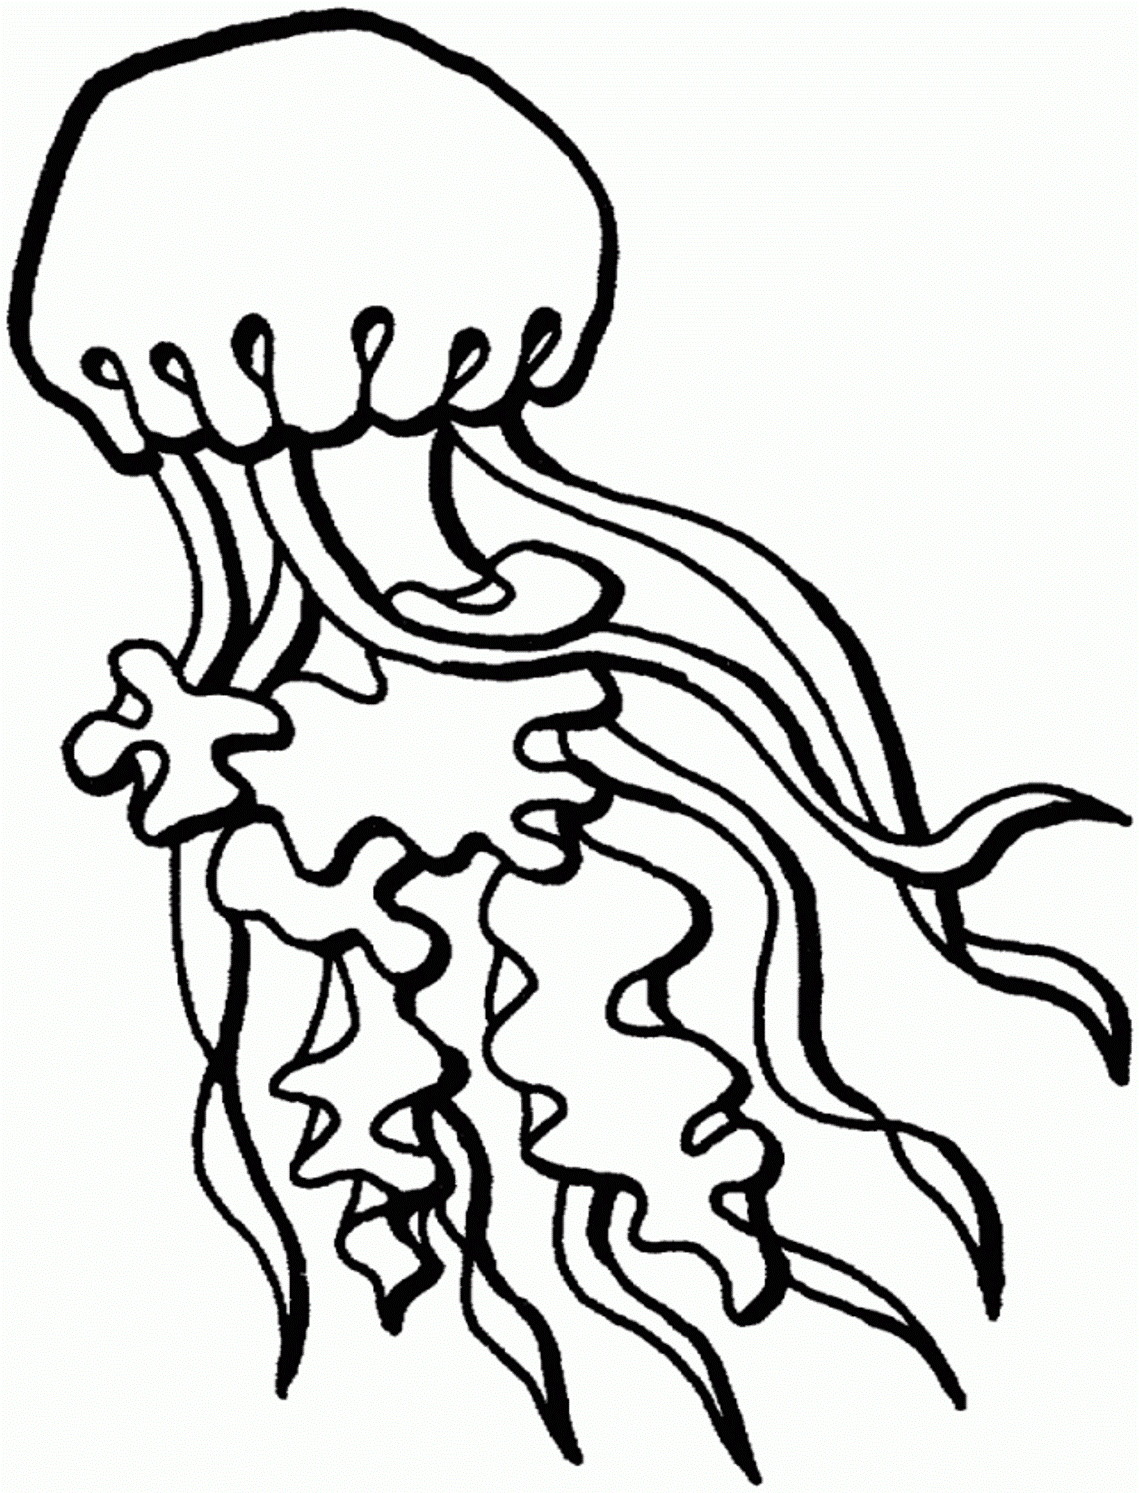 Jellyfish coloring pages to download and print for free